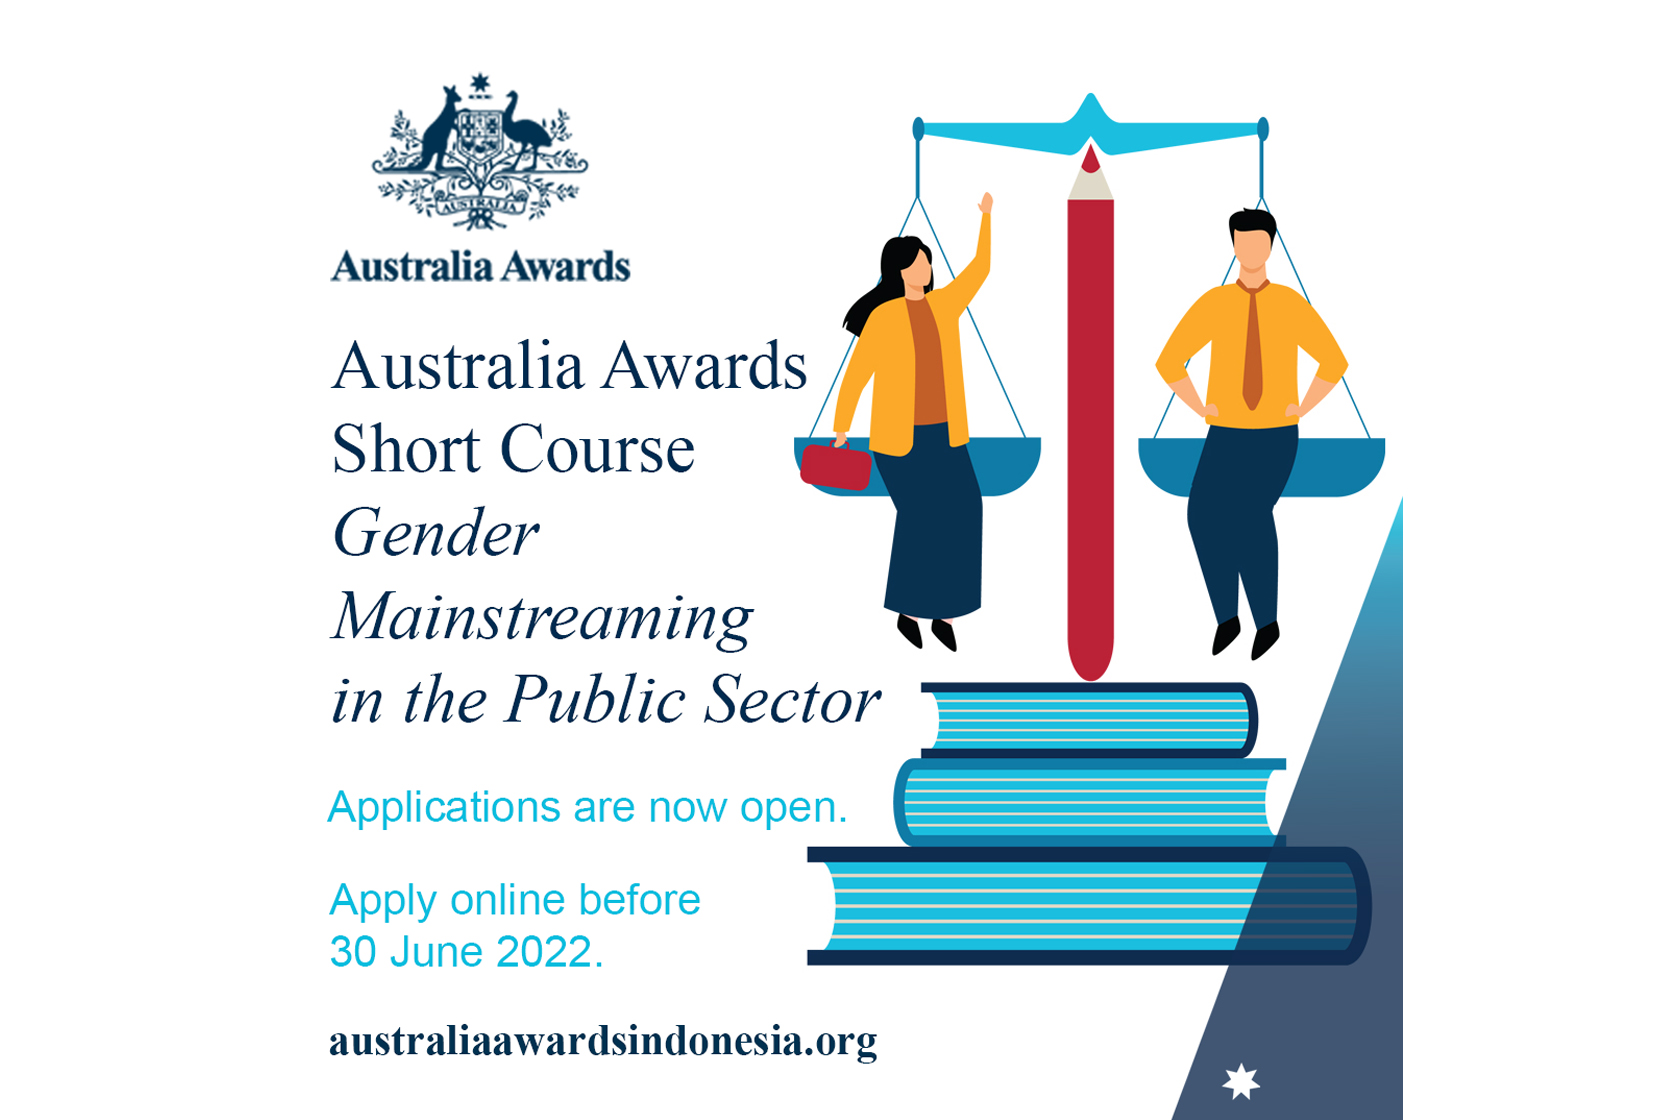 Applications Open for the Australia Awards Short Course on Gender Mainstreaming in the Public Sector